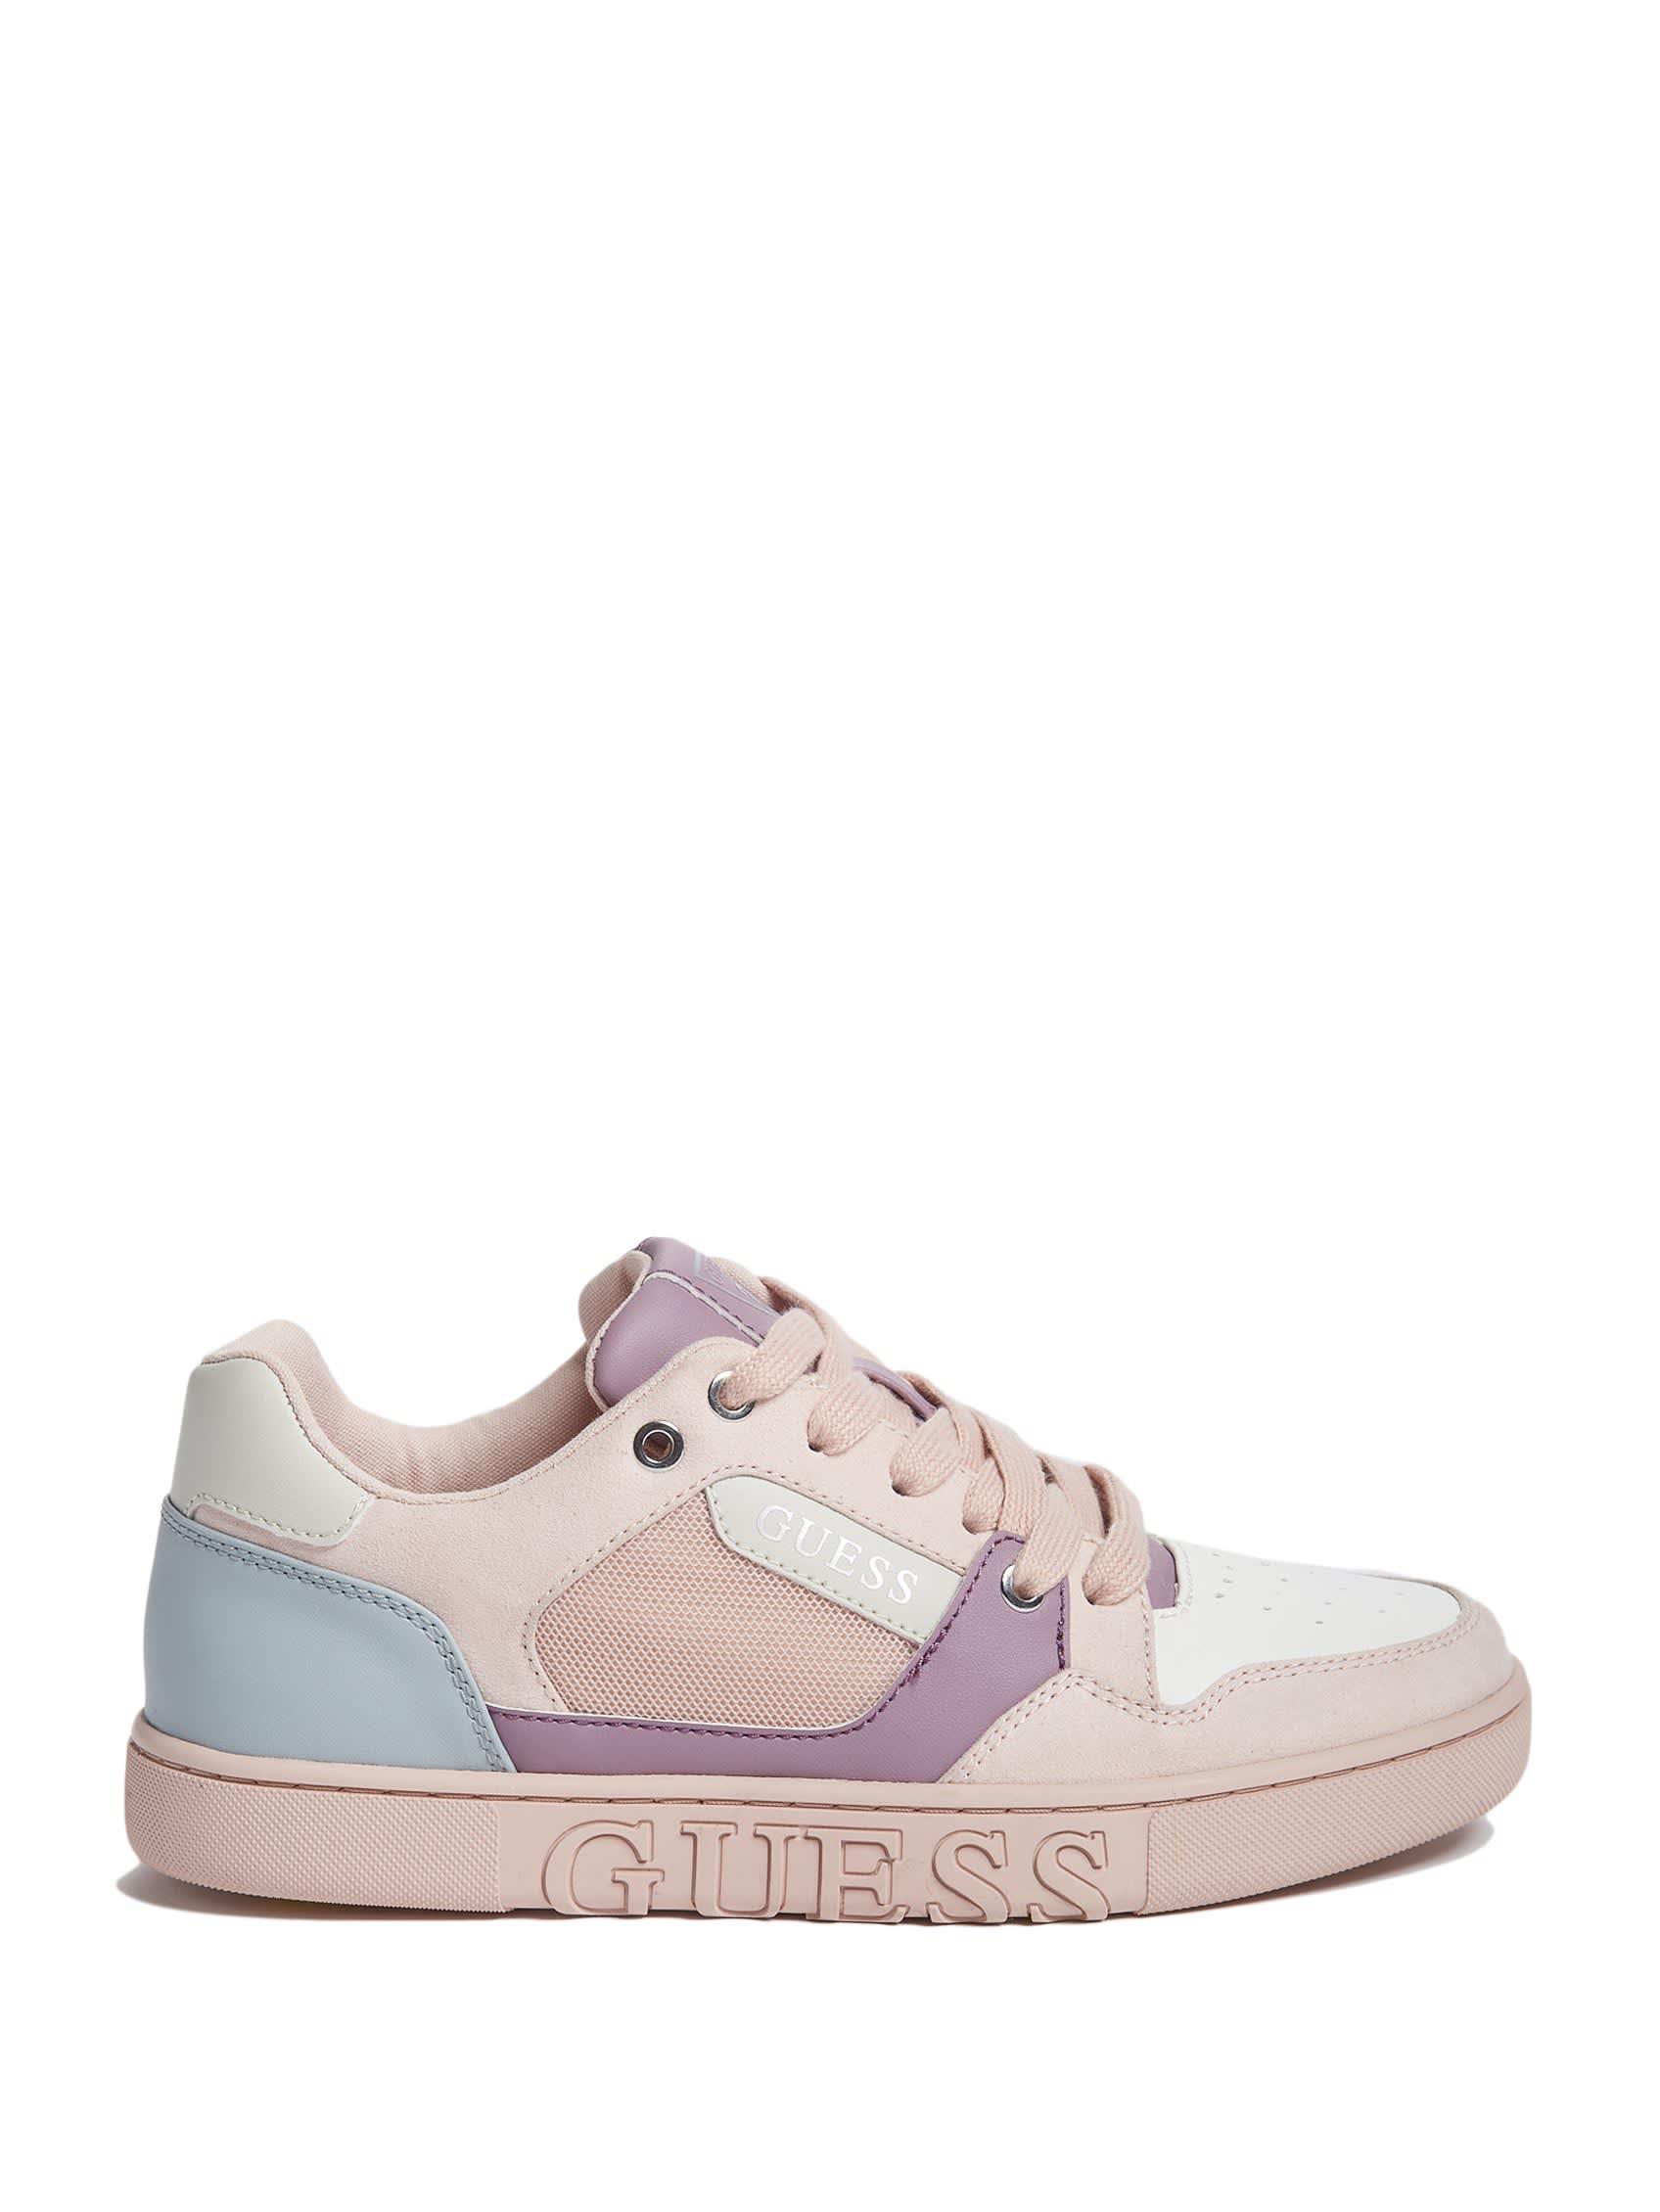 Guess Factory Jetting Color-block Low-top Sneakers in Pink | Lyst